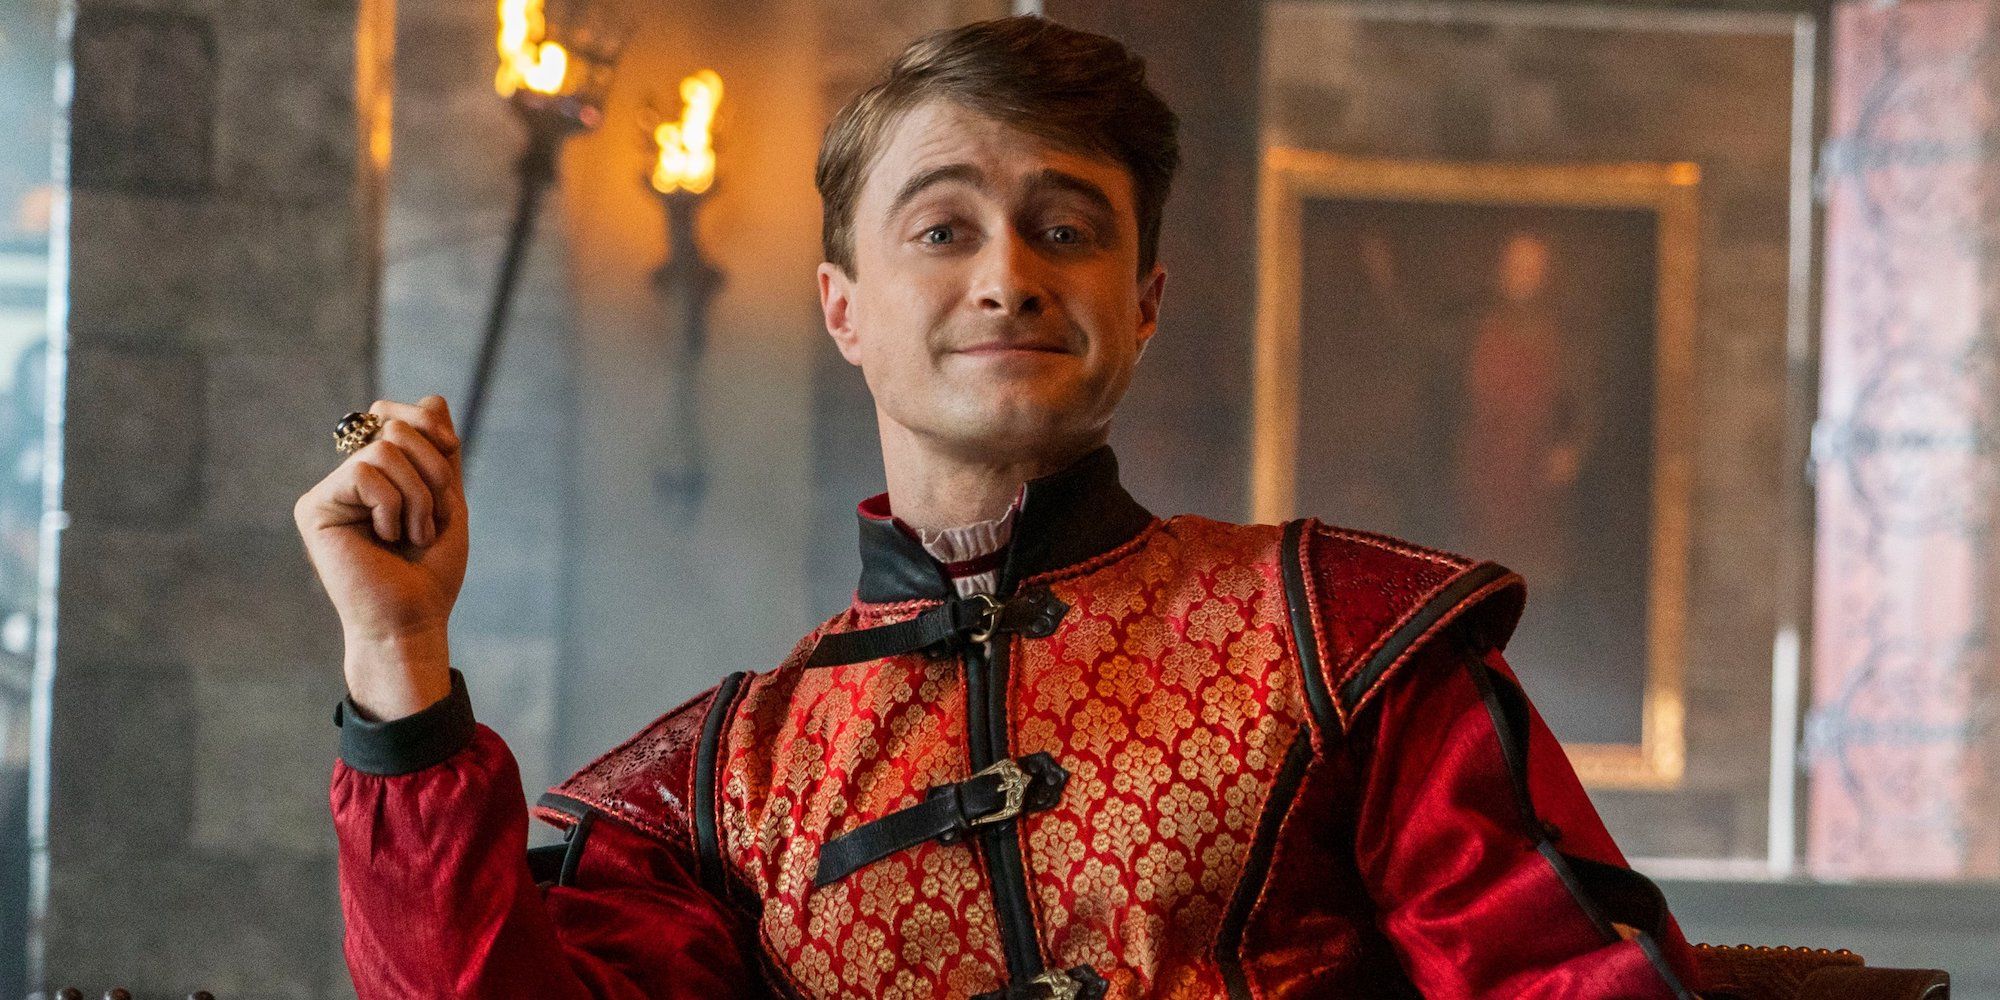 Daniel Radcliffe as Prince Chauncley in Miracle Workers